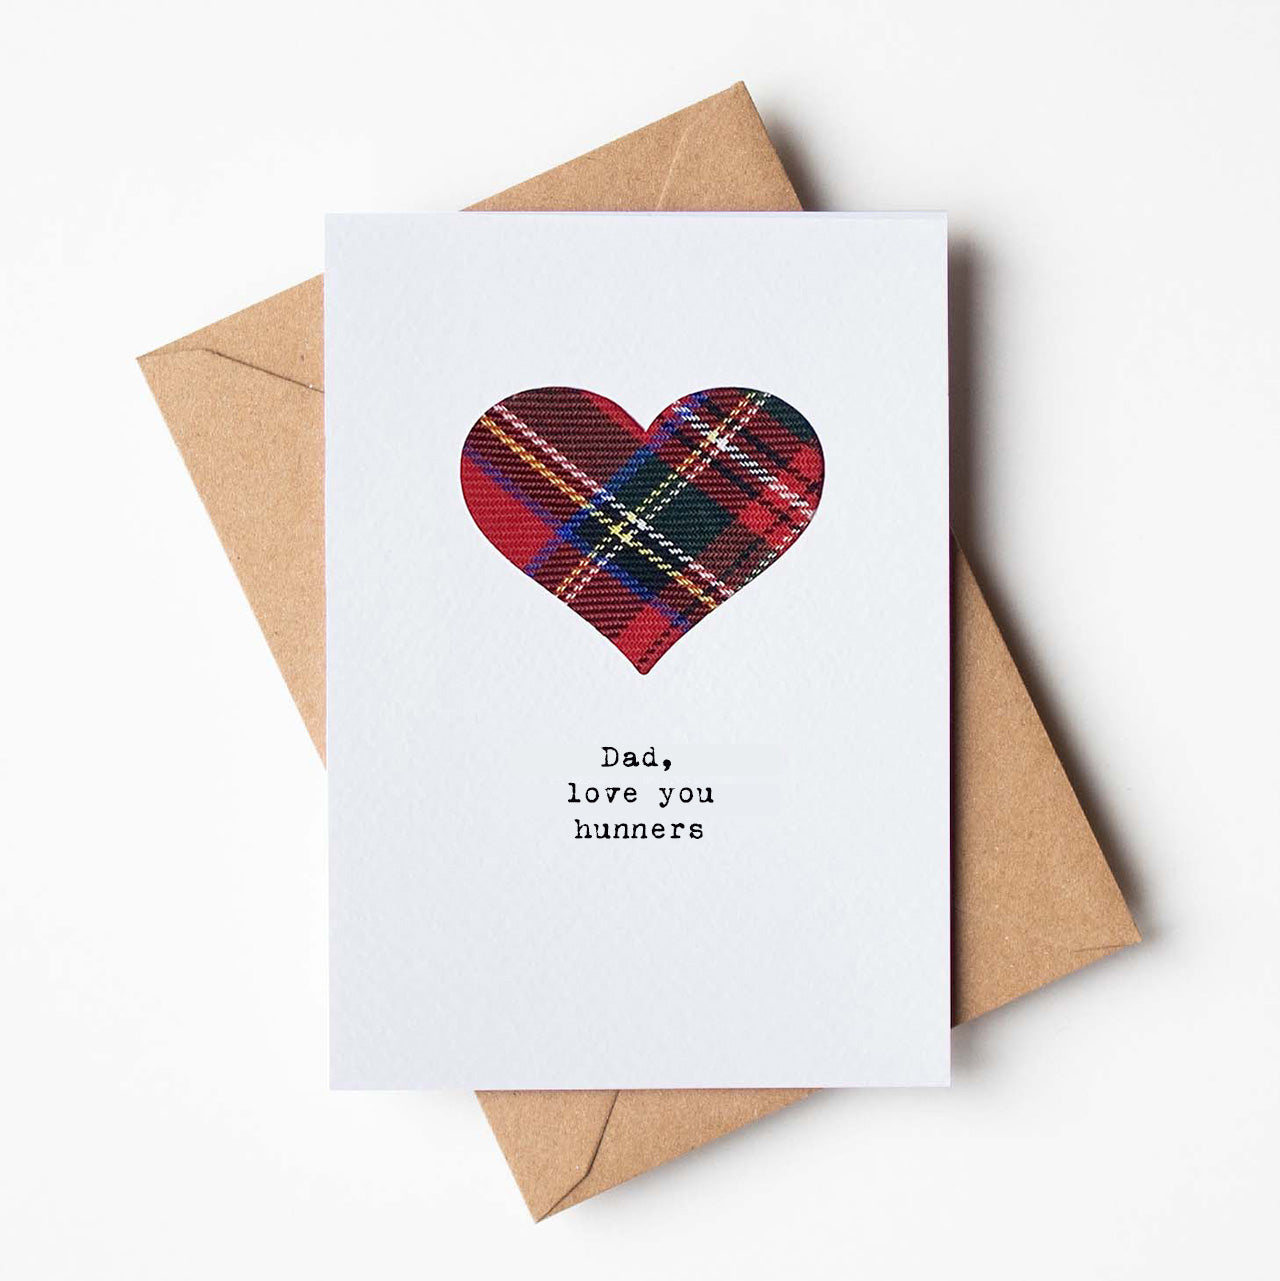 'Dad, love you hunners' Scottish Father's Day Card